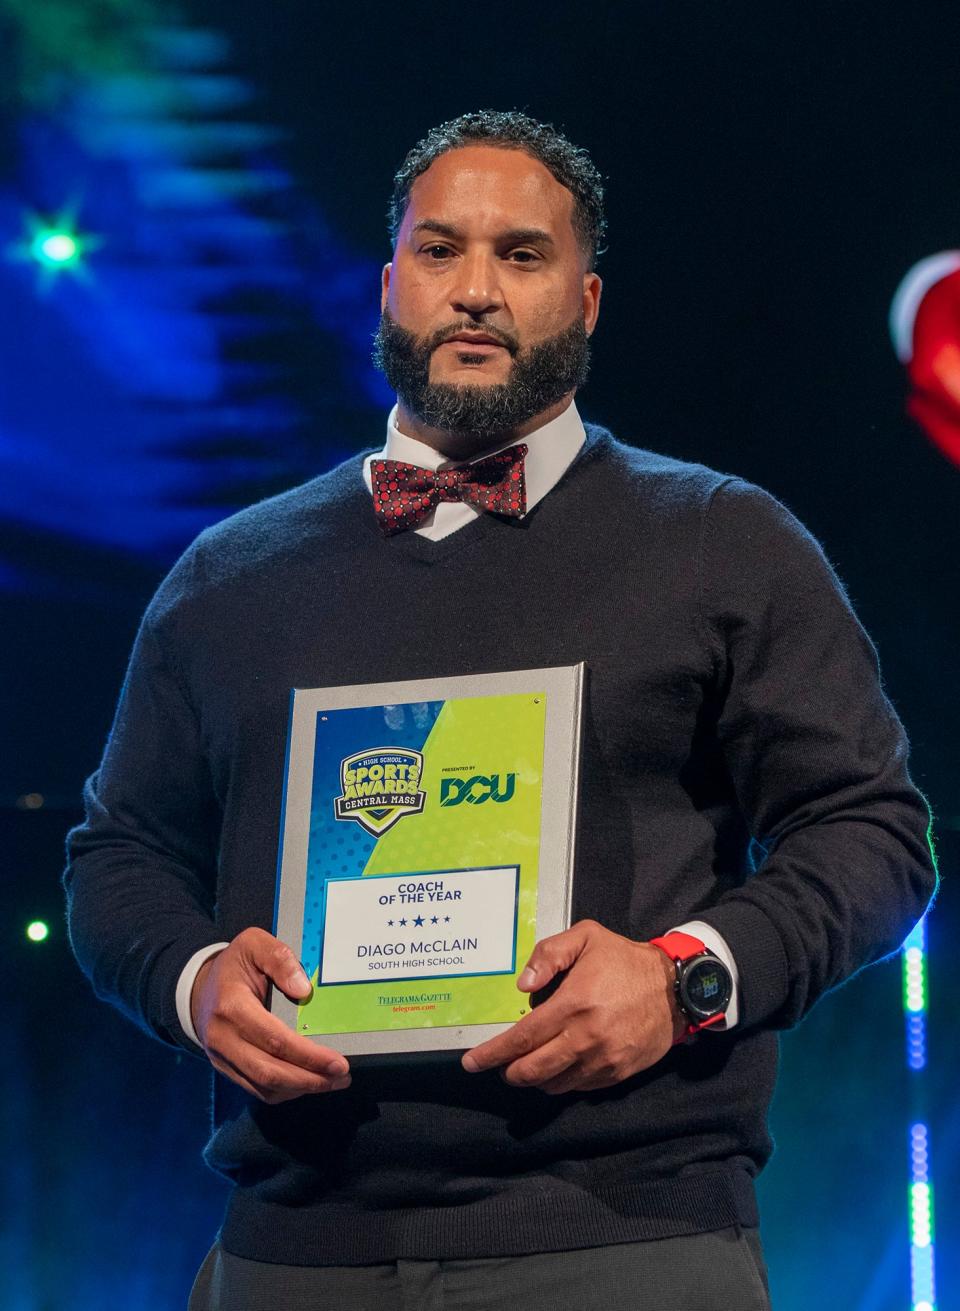 South High girls' basketball coach Diago McClain was named the Hometeam Coach of the Year as the top student-athletes in Central Massachusetts were honored Wednesday night at the Hanover Theatre at the Central Mass. High School Sports Awards ceremony.